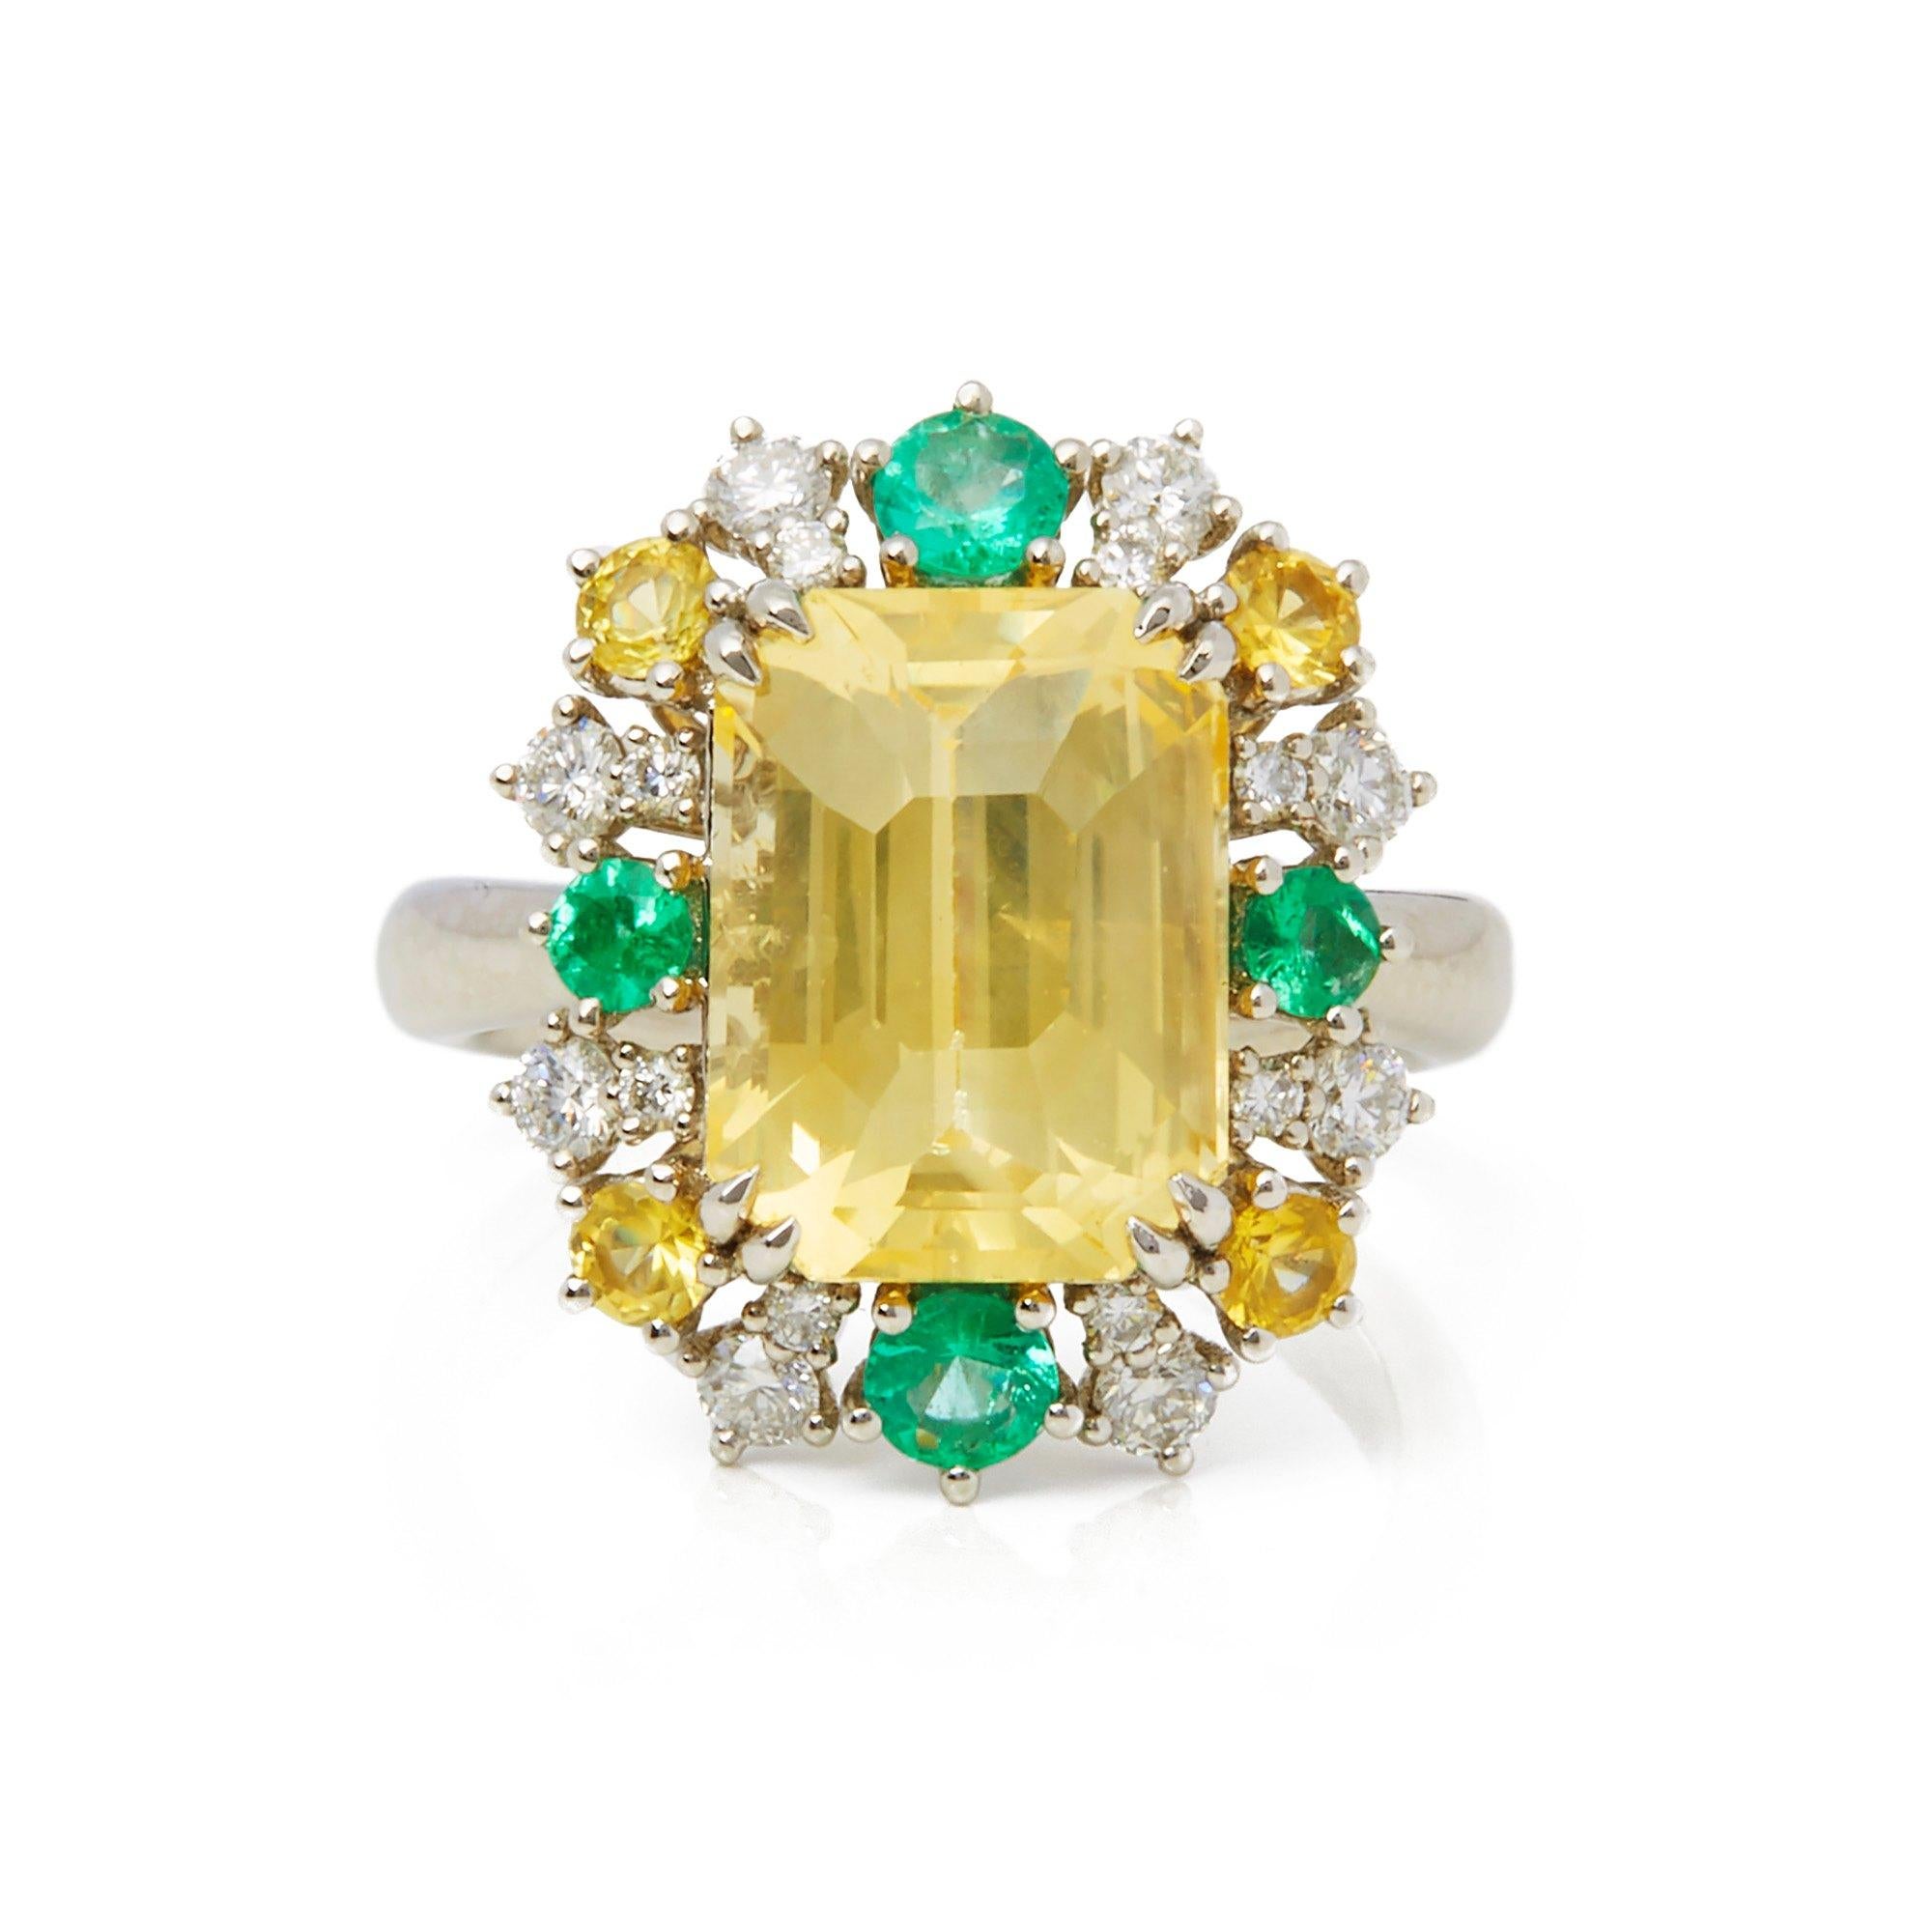 This ring designed by David Jerome is from his private collection and features one untreated Emerald cut yellow Sapphire sourced in Sri Lanka. Totalling 8.08cts Set with round brilliant cut Diamonds totalling 0.53cts. Mounted in platinum. Finger